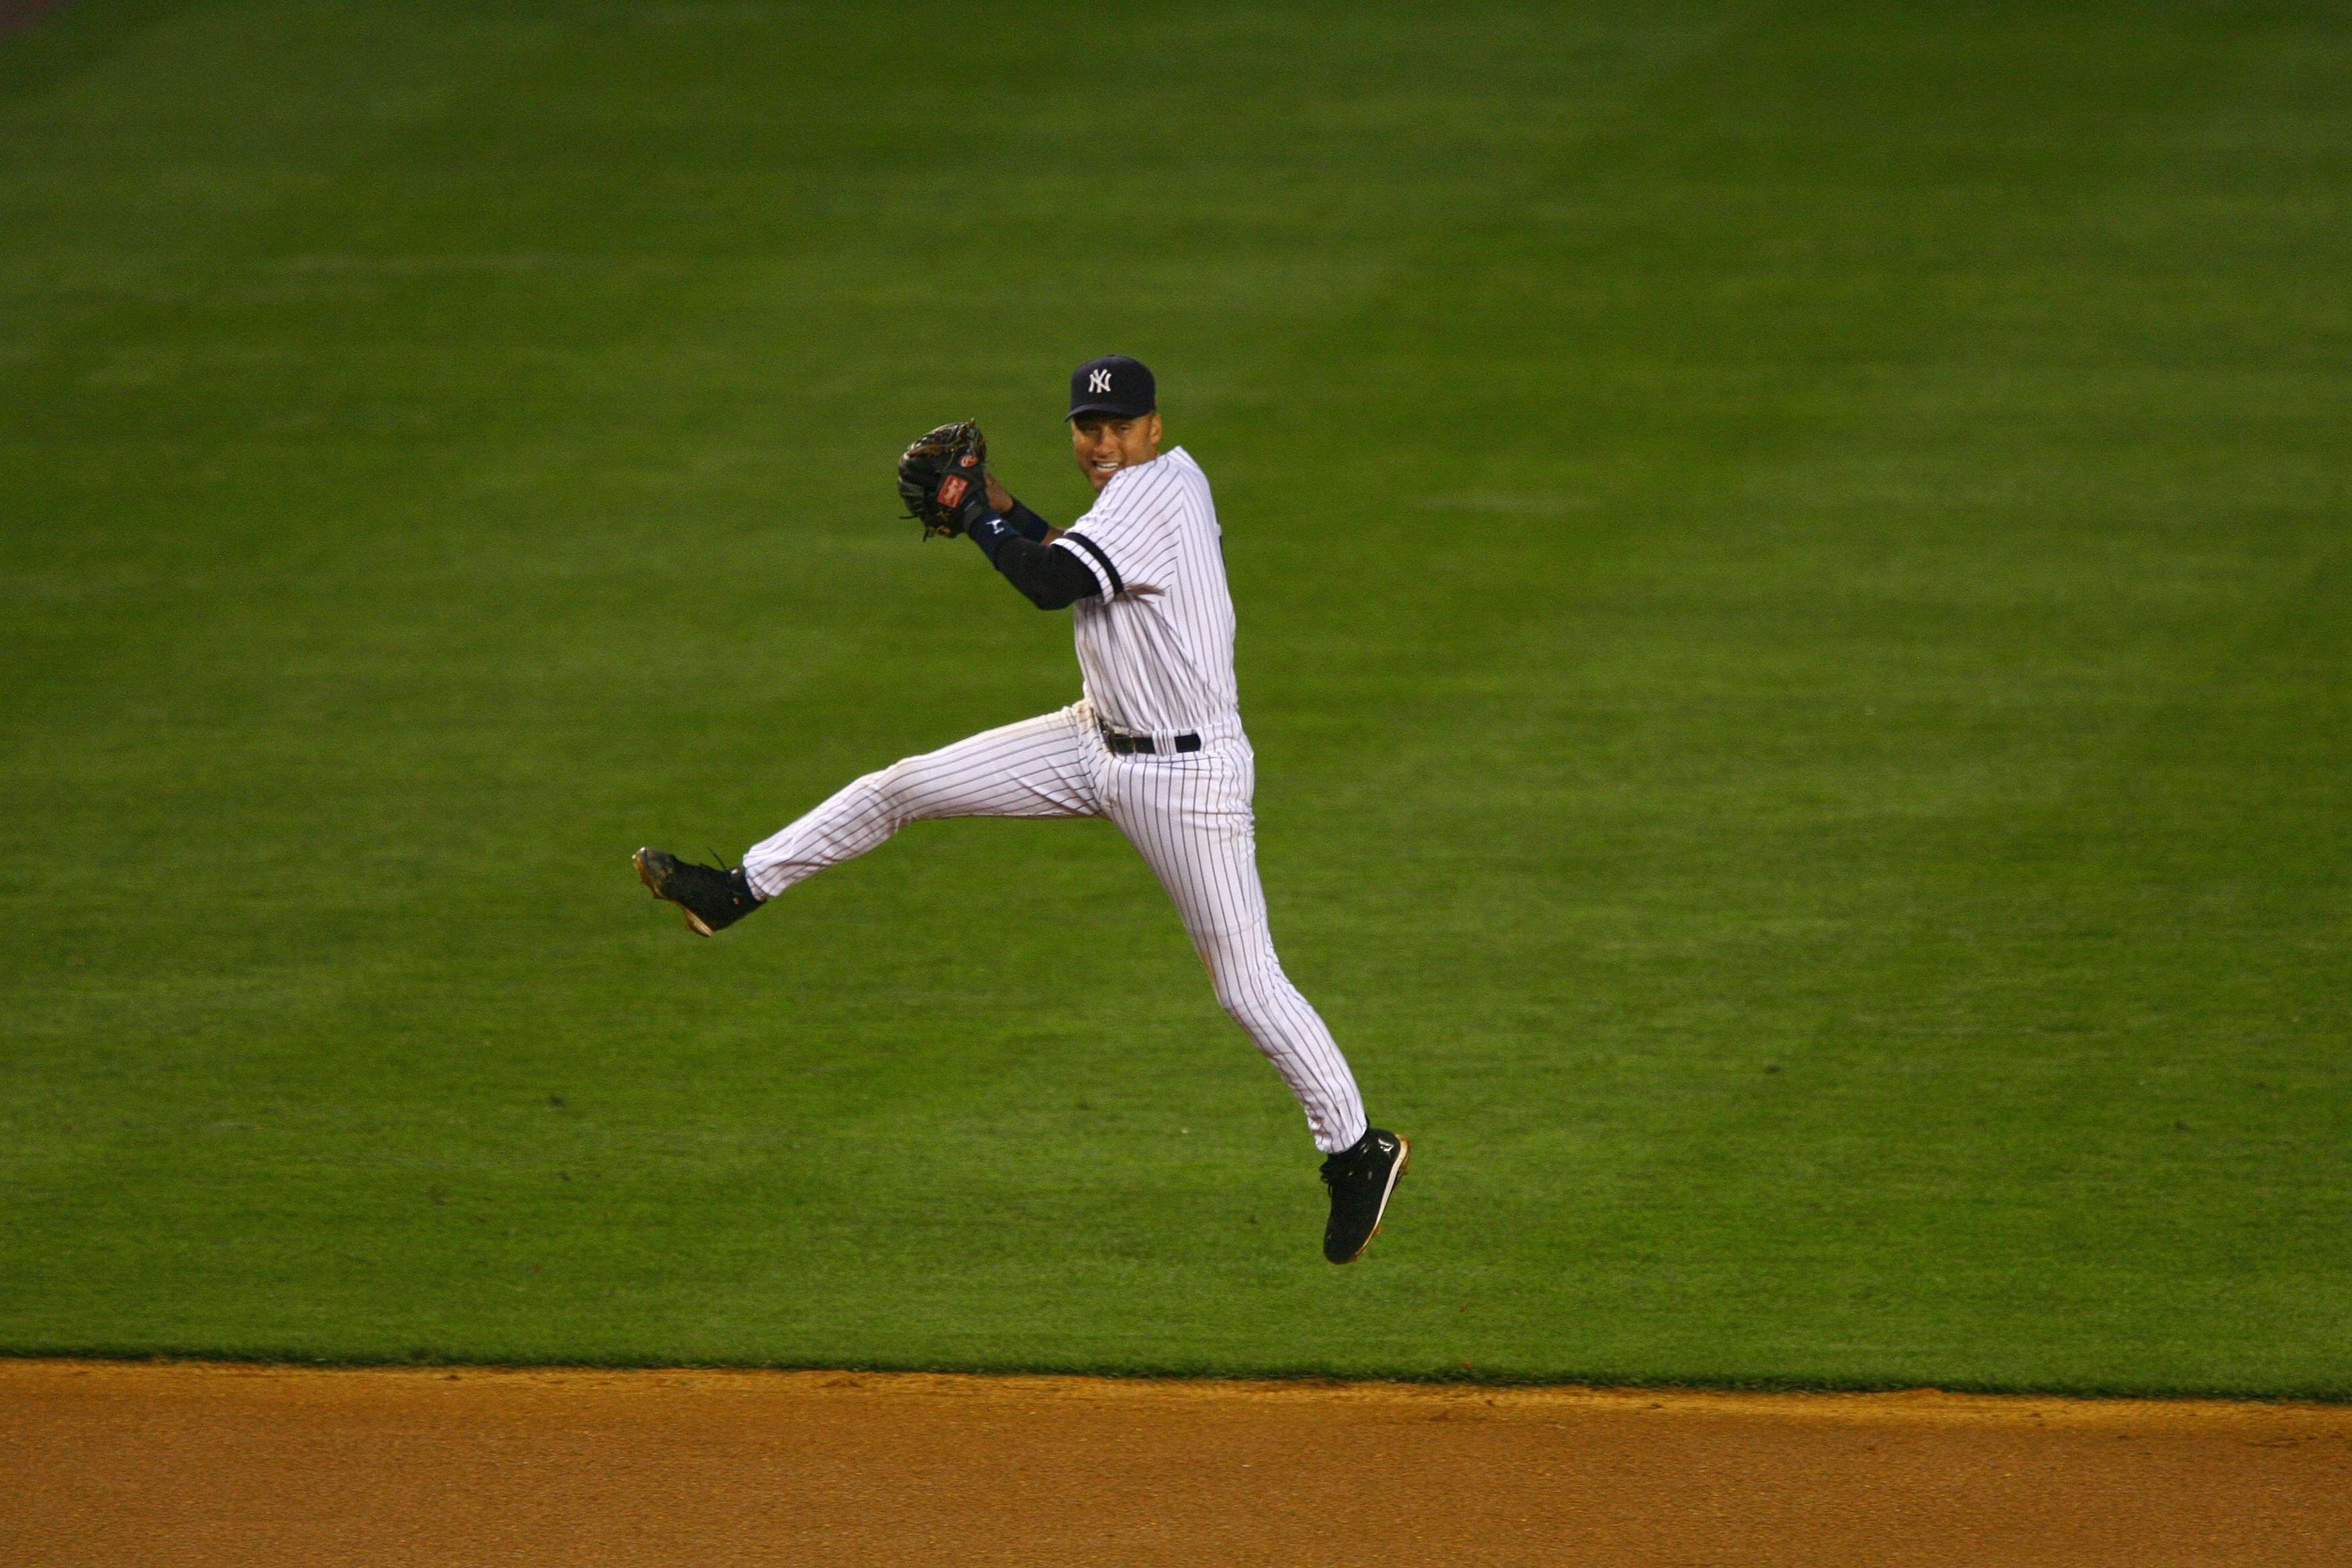 How Derek Jeter Made $265 Million to Become the Second Highest